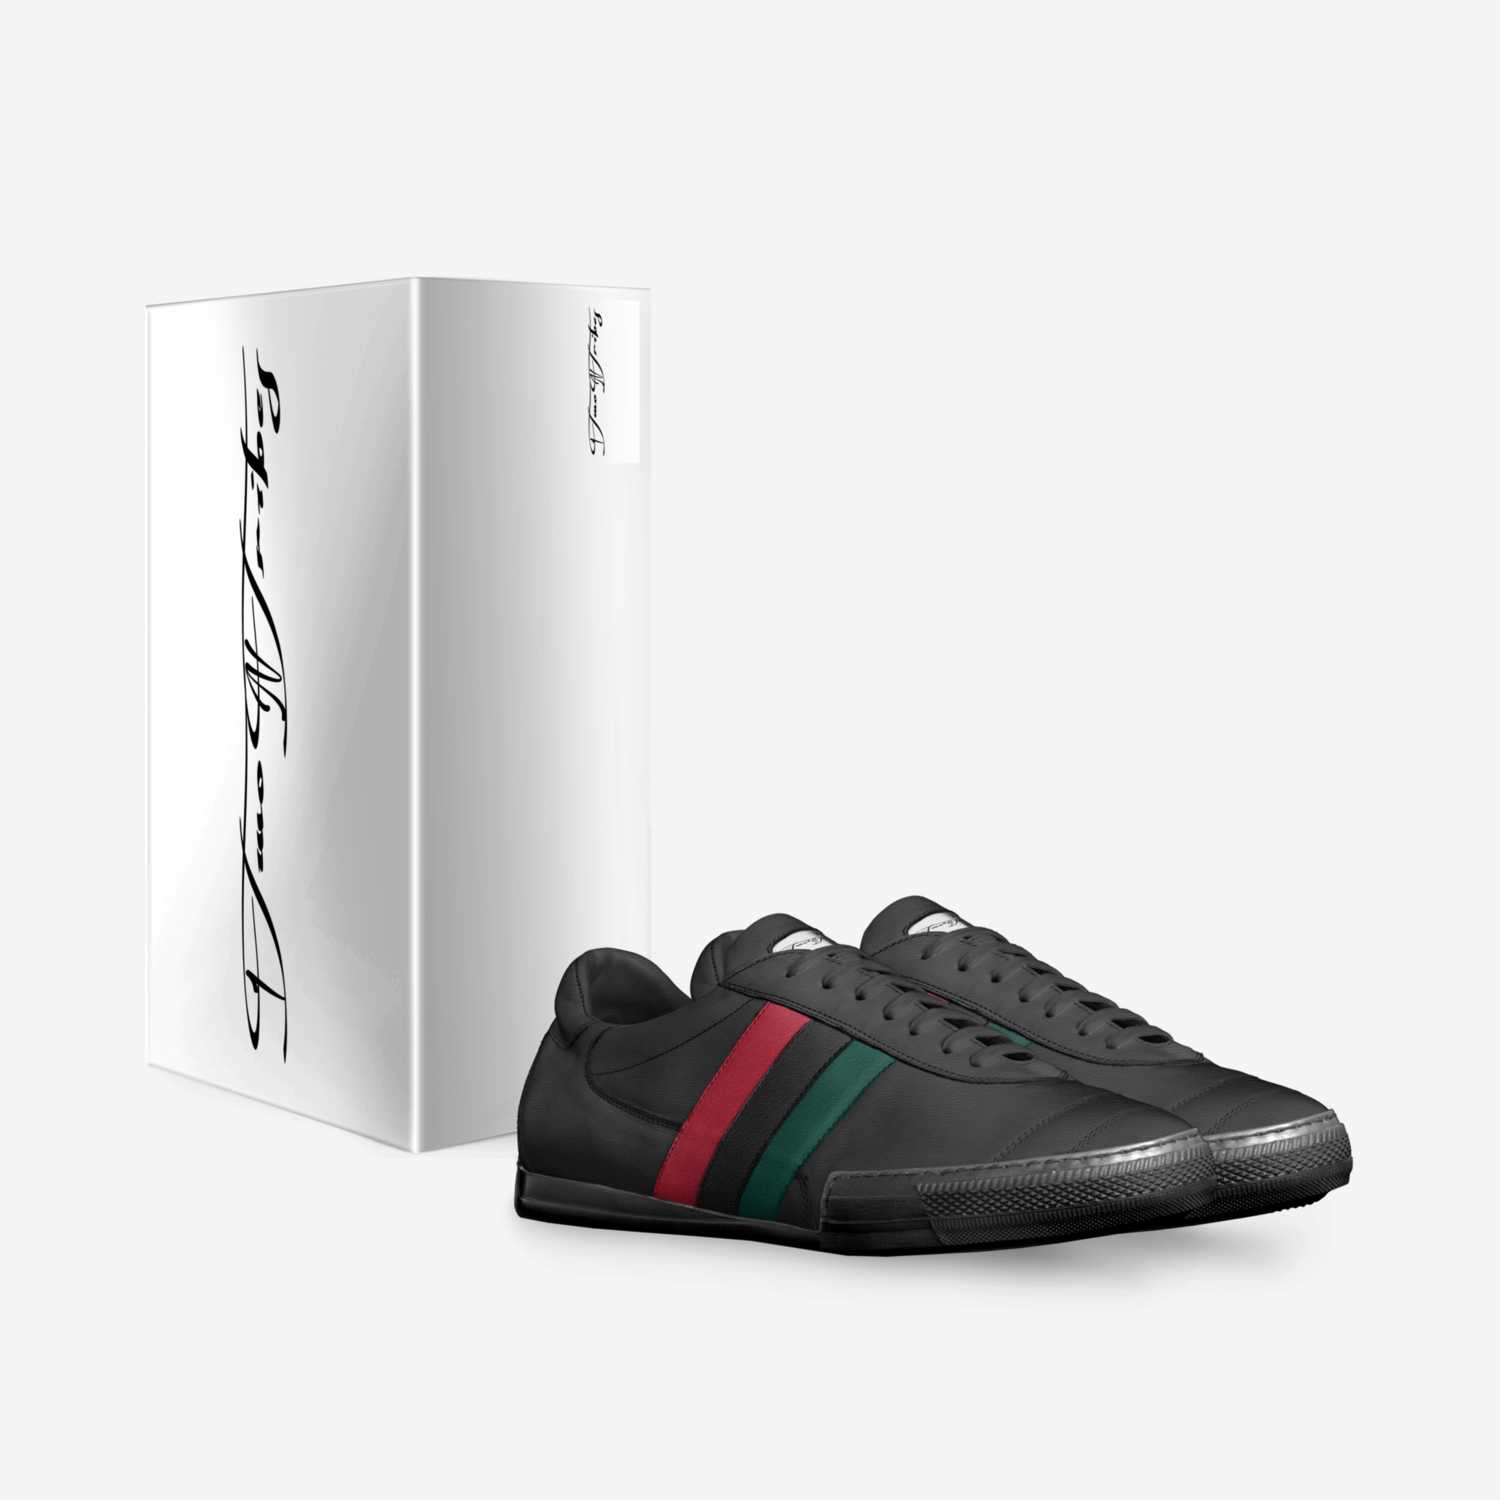 RBG 2's custom made in Italy shoes by Carl Gayton | Box view